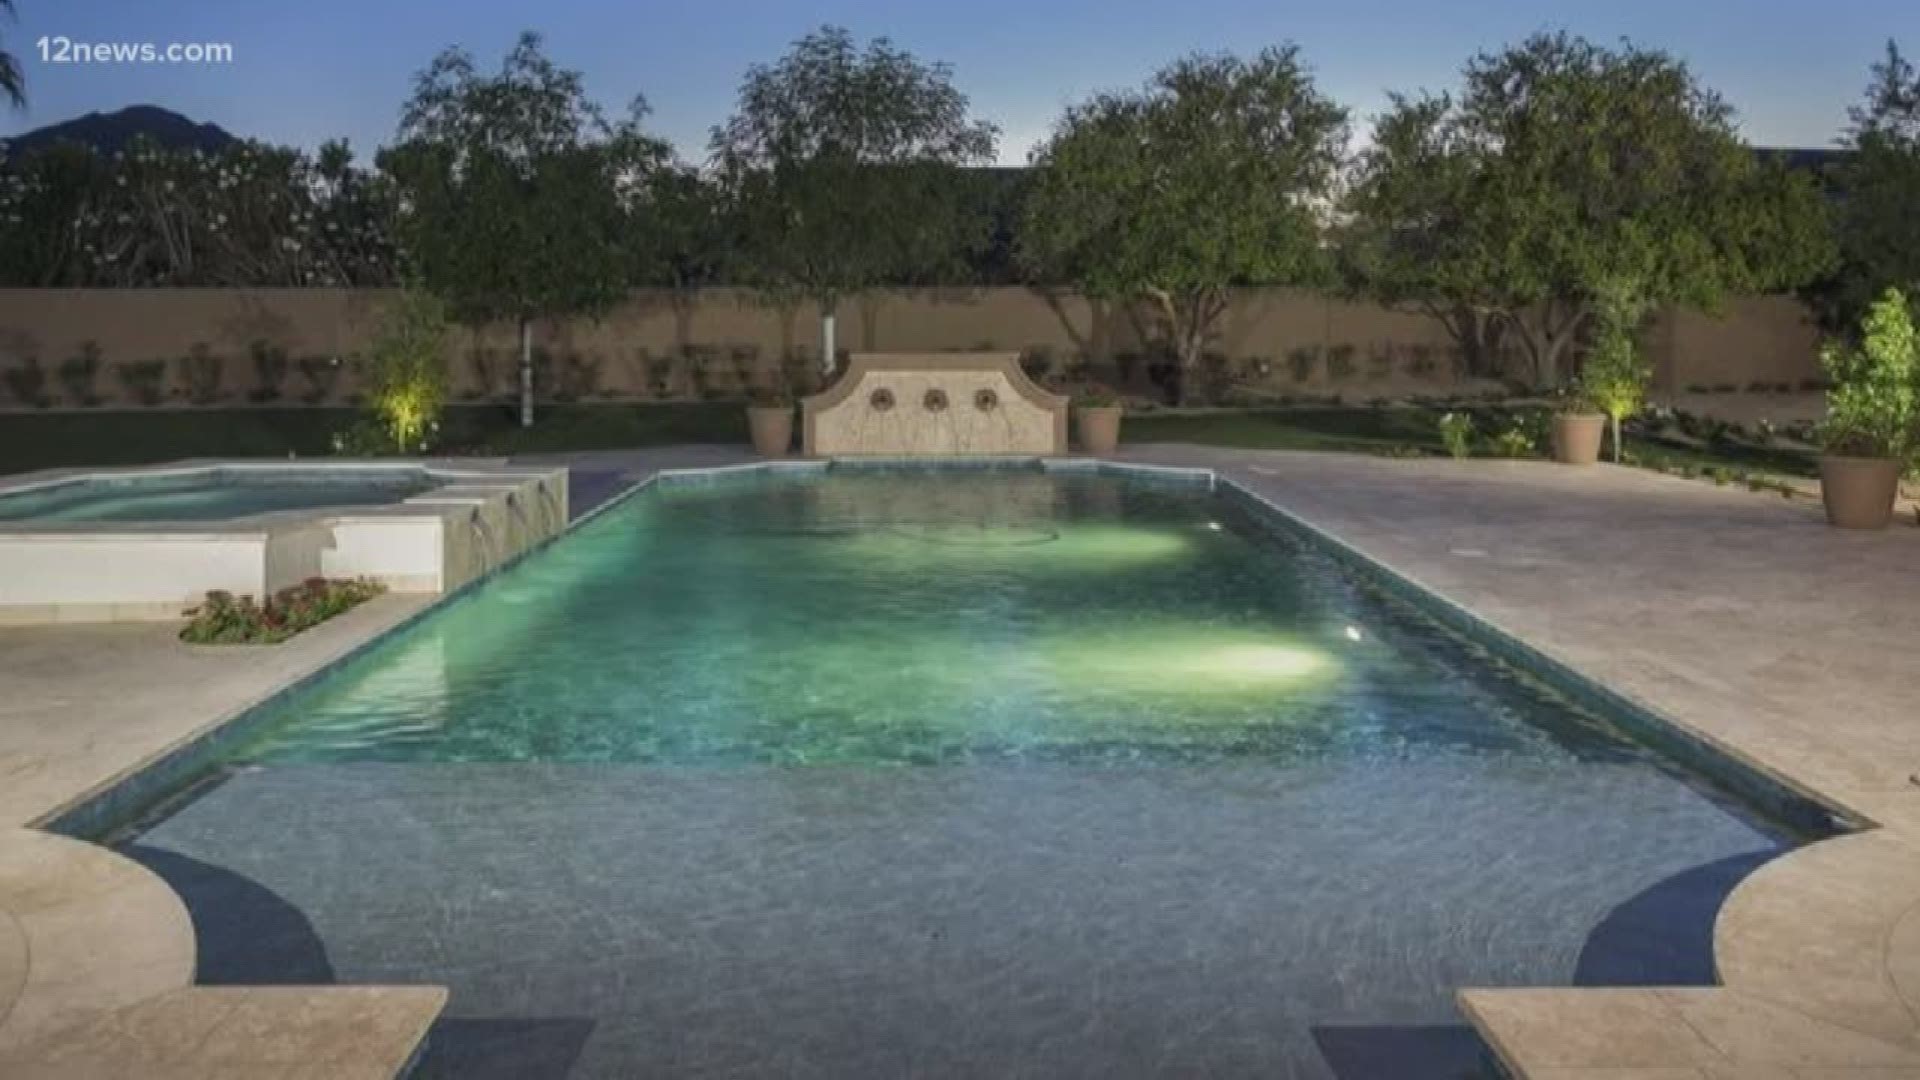 Olympian Michael Phelps has sold his Paradise Valley home for $1 million profit. The five-bedroom home included six-and-a-half bathrooms and pool fit for an Olympian.